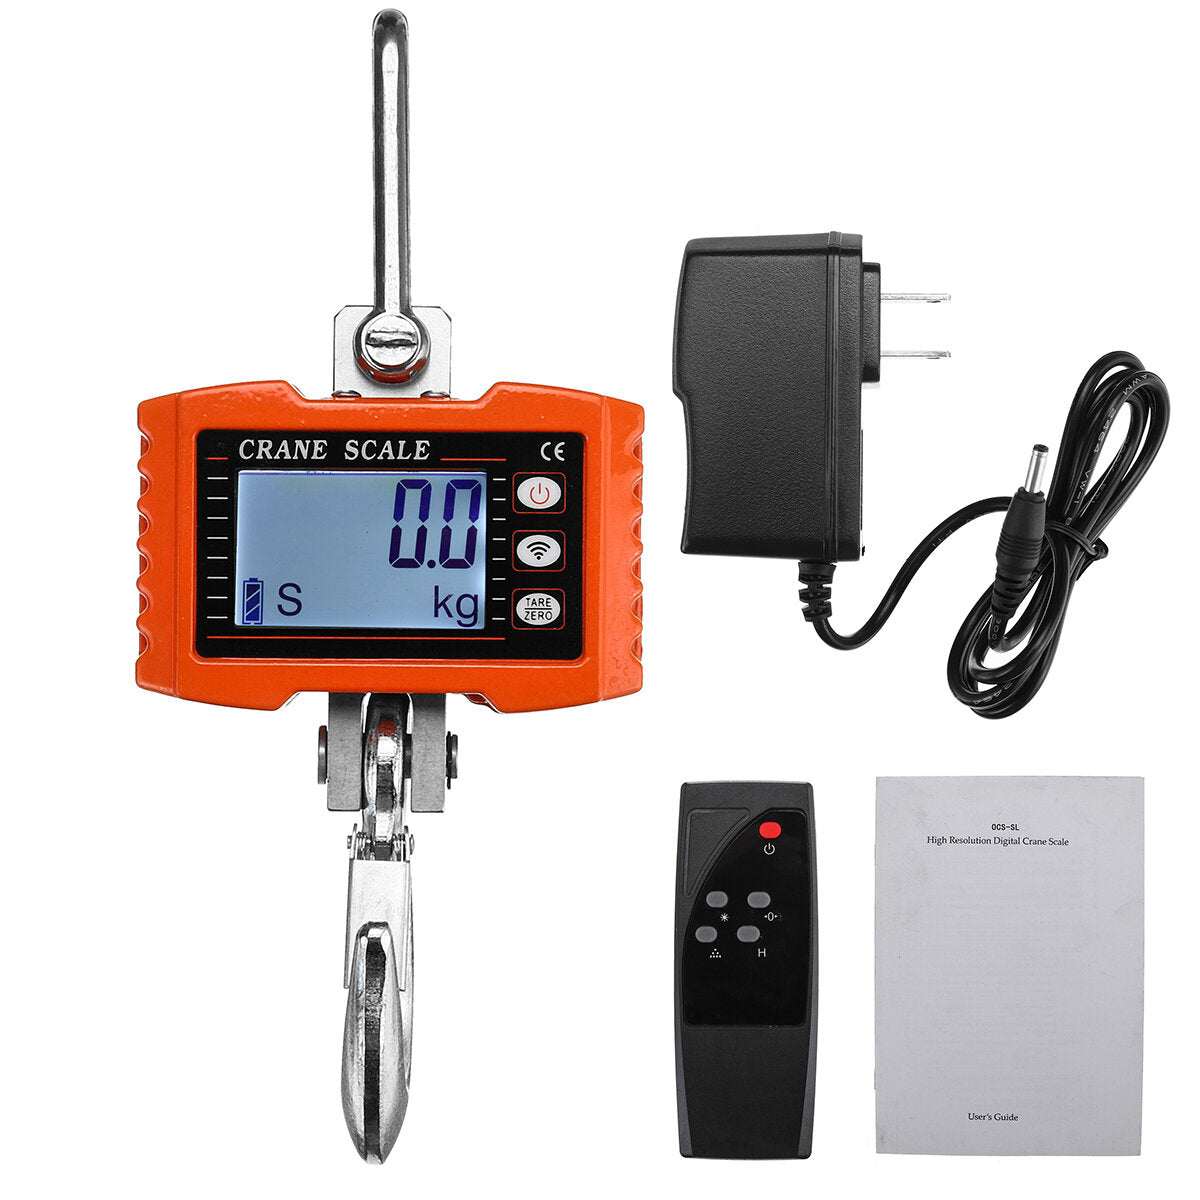 0.2kg-1000kg HD LED Display Wireless Electronic Hook Scale With Remote control